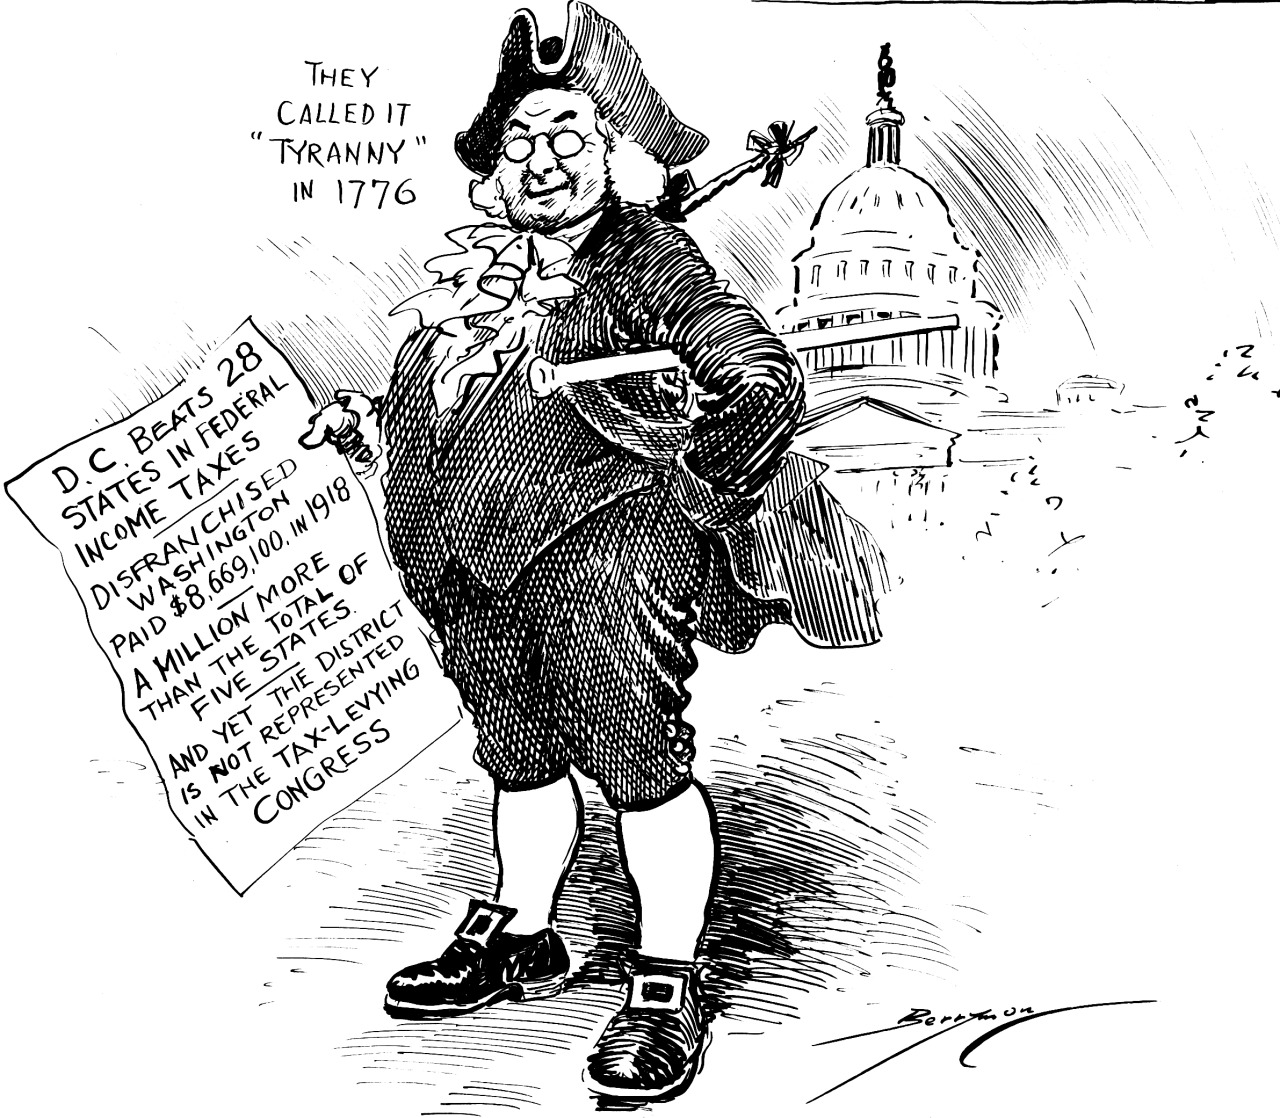 states vs federal rights political cartoon